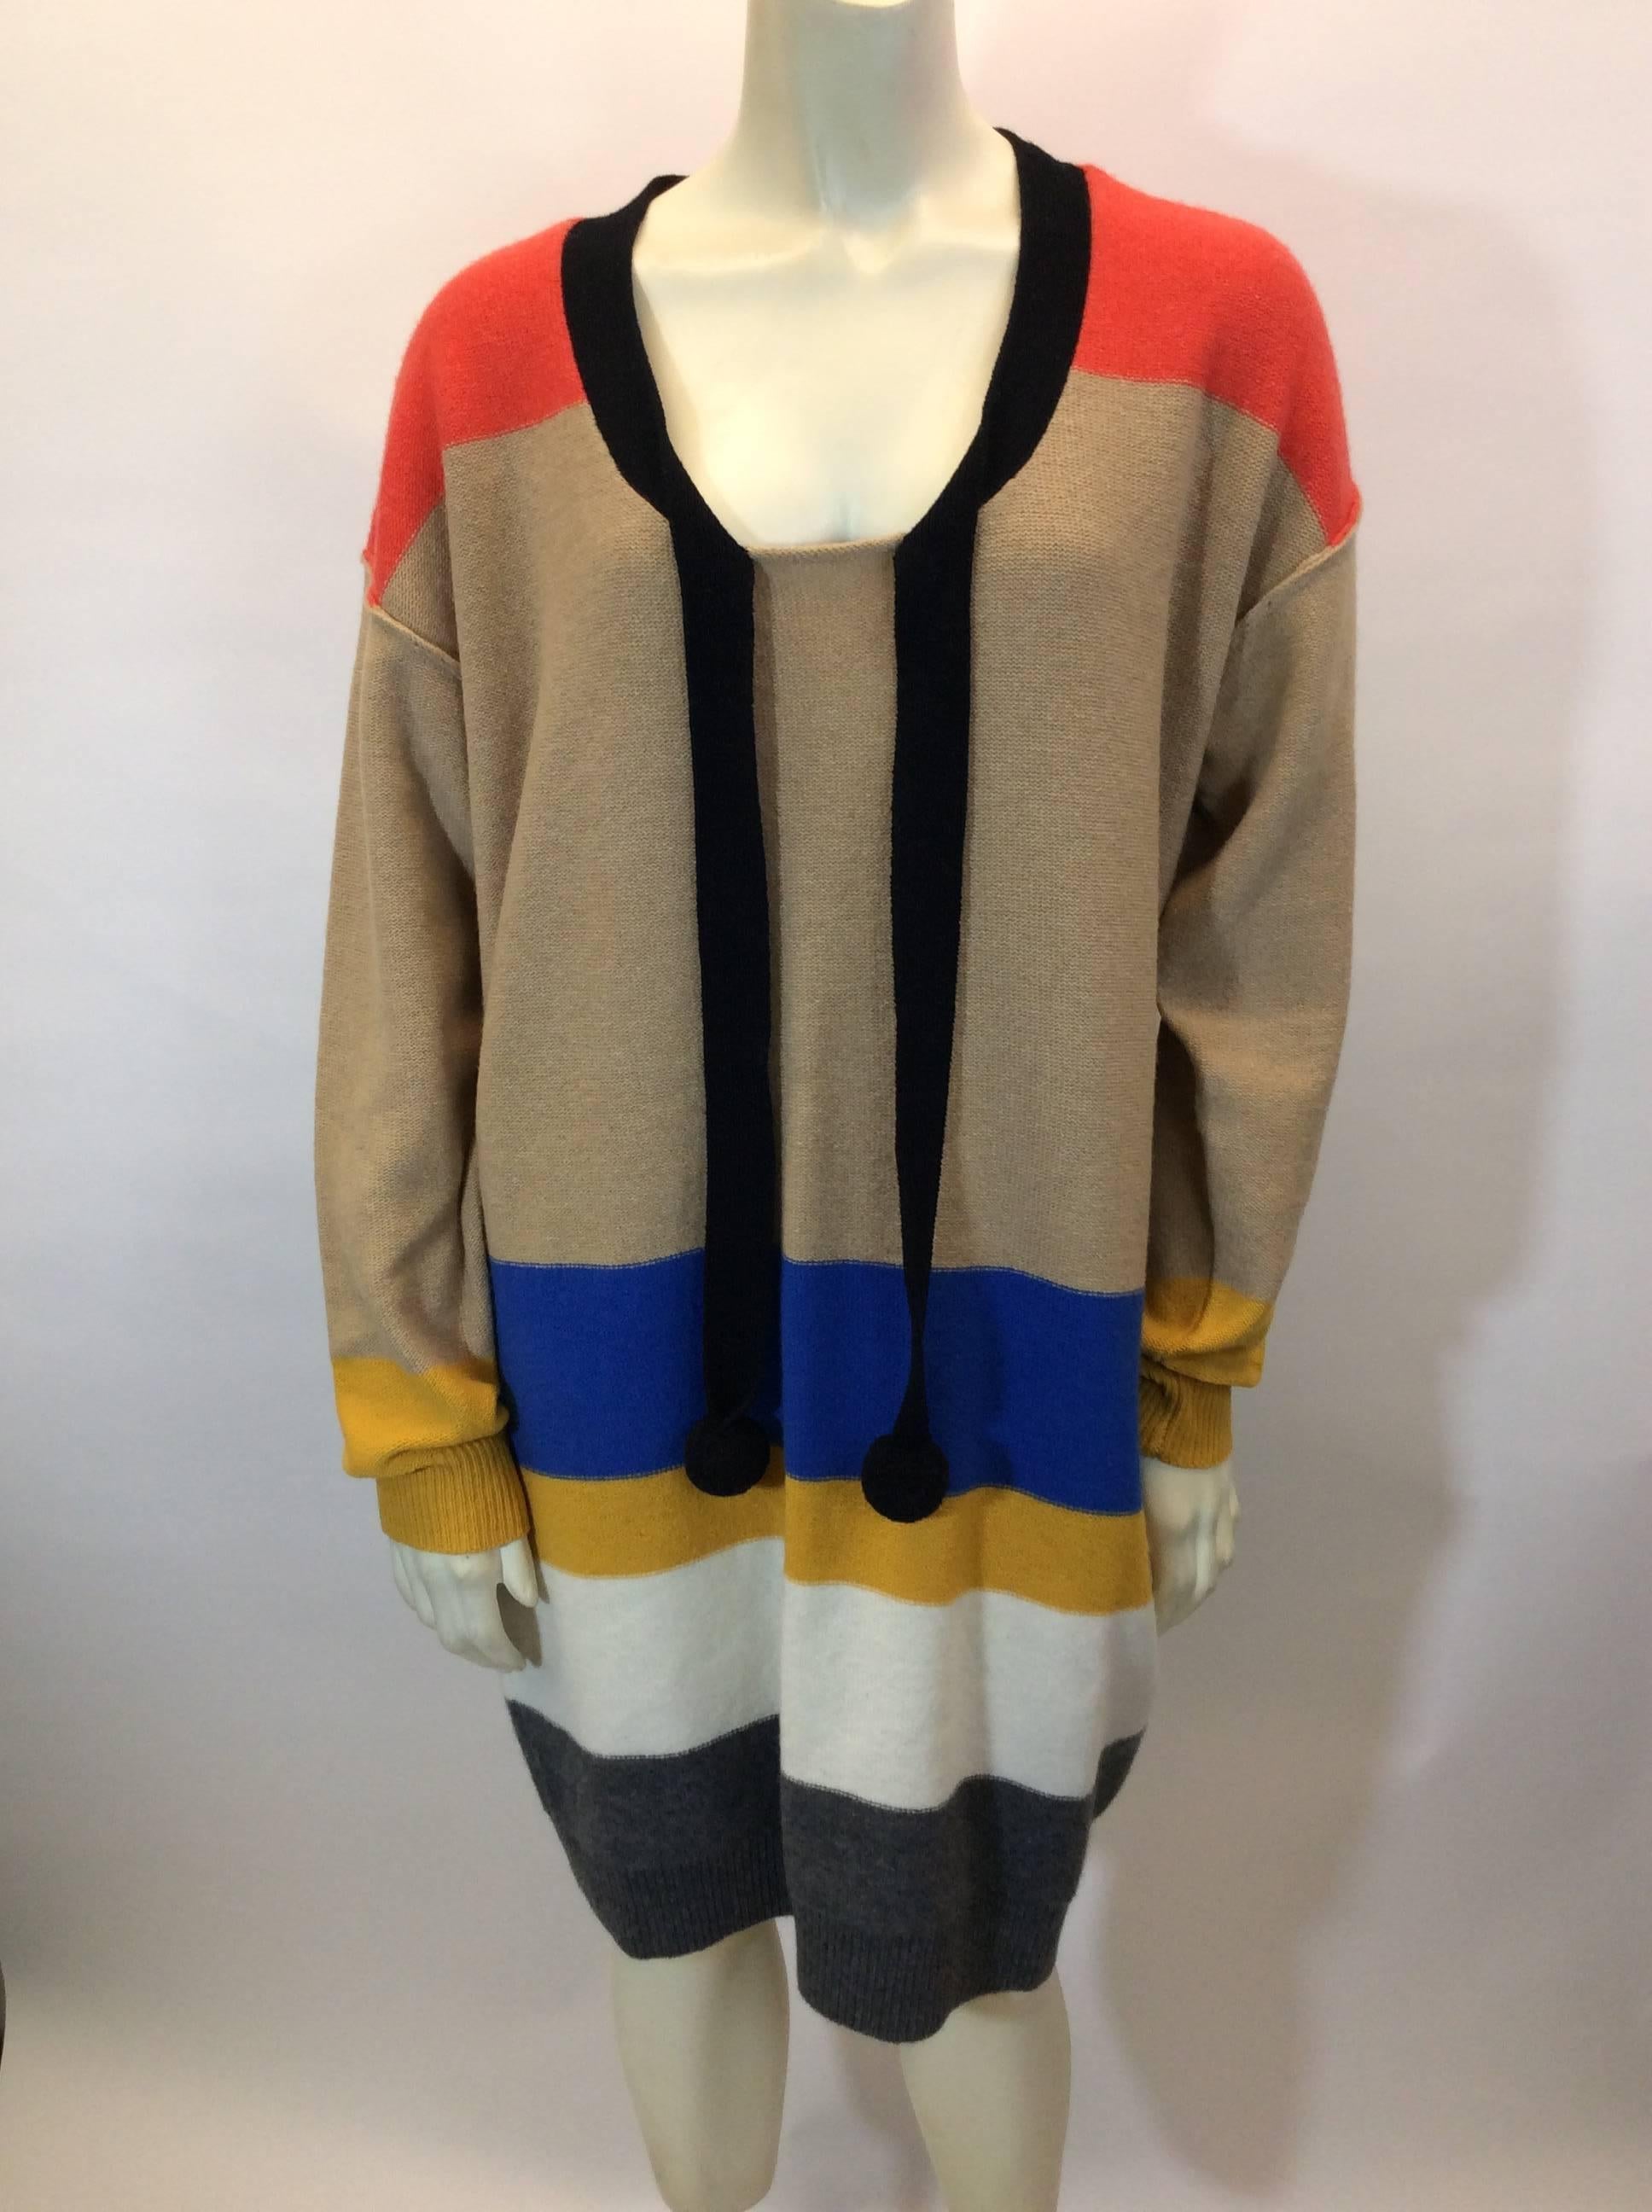 Multicolor Striped Tunic with Pom Pom Neck Tie
Includes two side seam hip pockets
Ribbed cuff and hemline
Adjustable neck tie with pom pom ends
Size 2
100% Wool